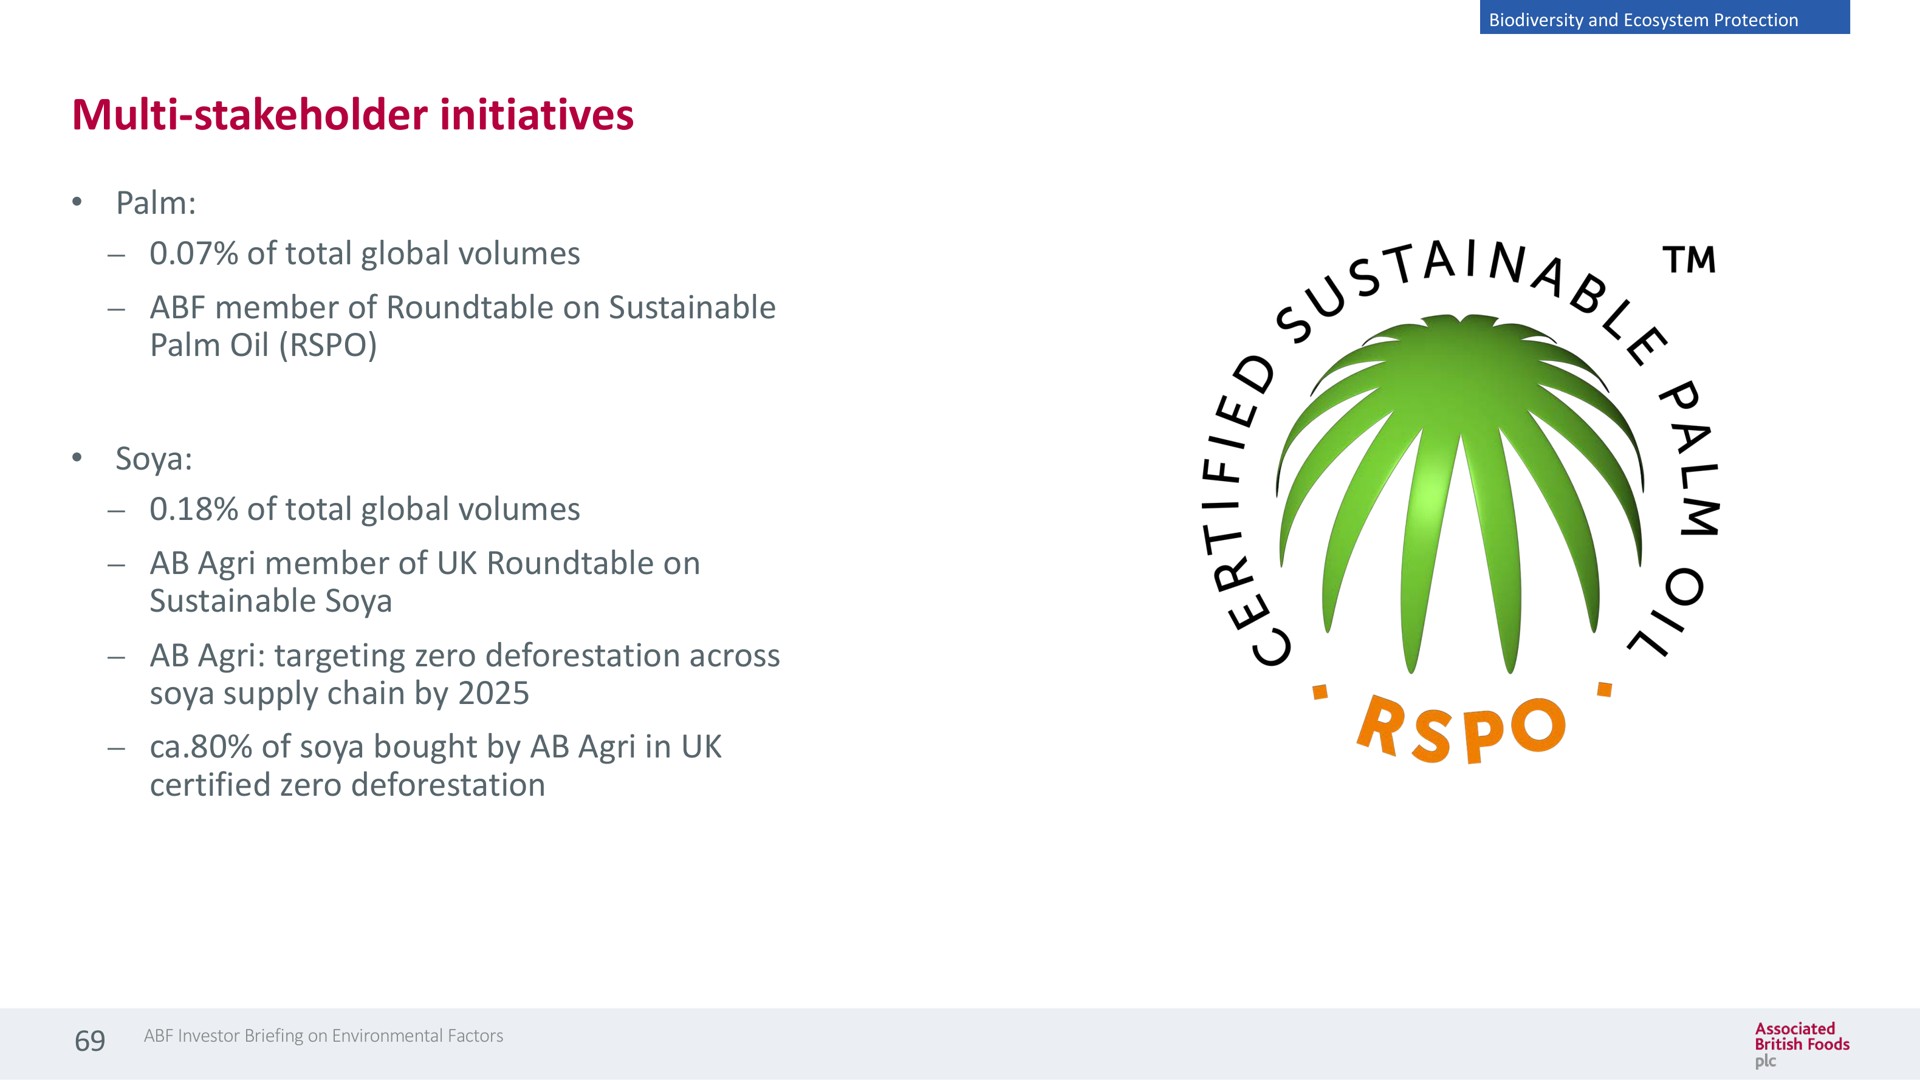 stakeholder initiatives palm of total global volumes member of on sustainable palm oil soya of total global volumes member of on sustainable soya targeting zero deforestation across soya supply chain by of soya bought by in certified zero deforestation a a | Associated British Foods